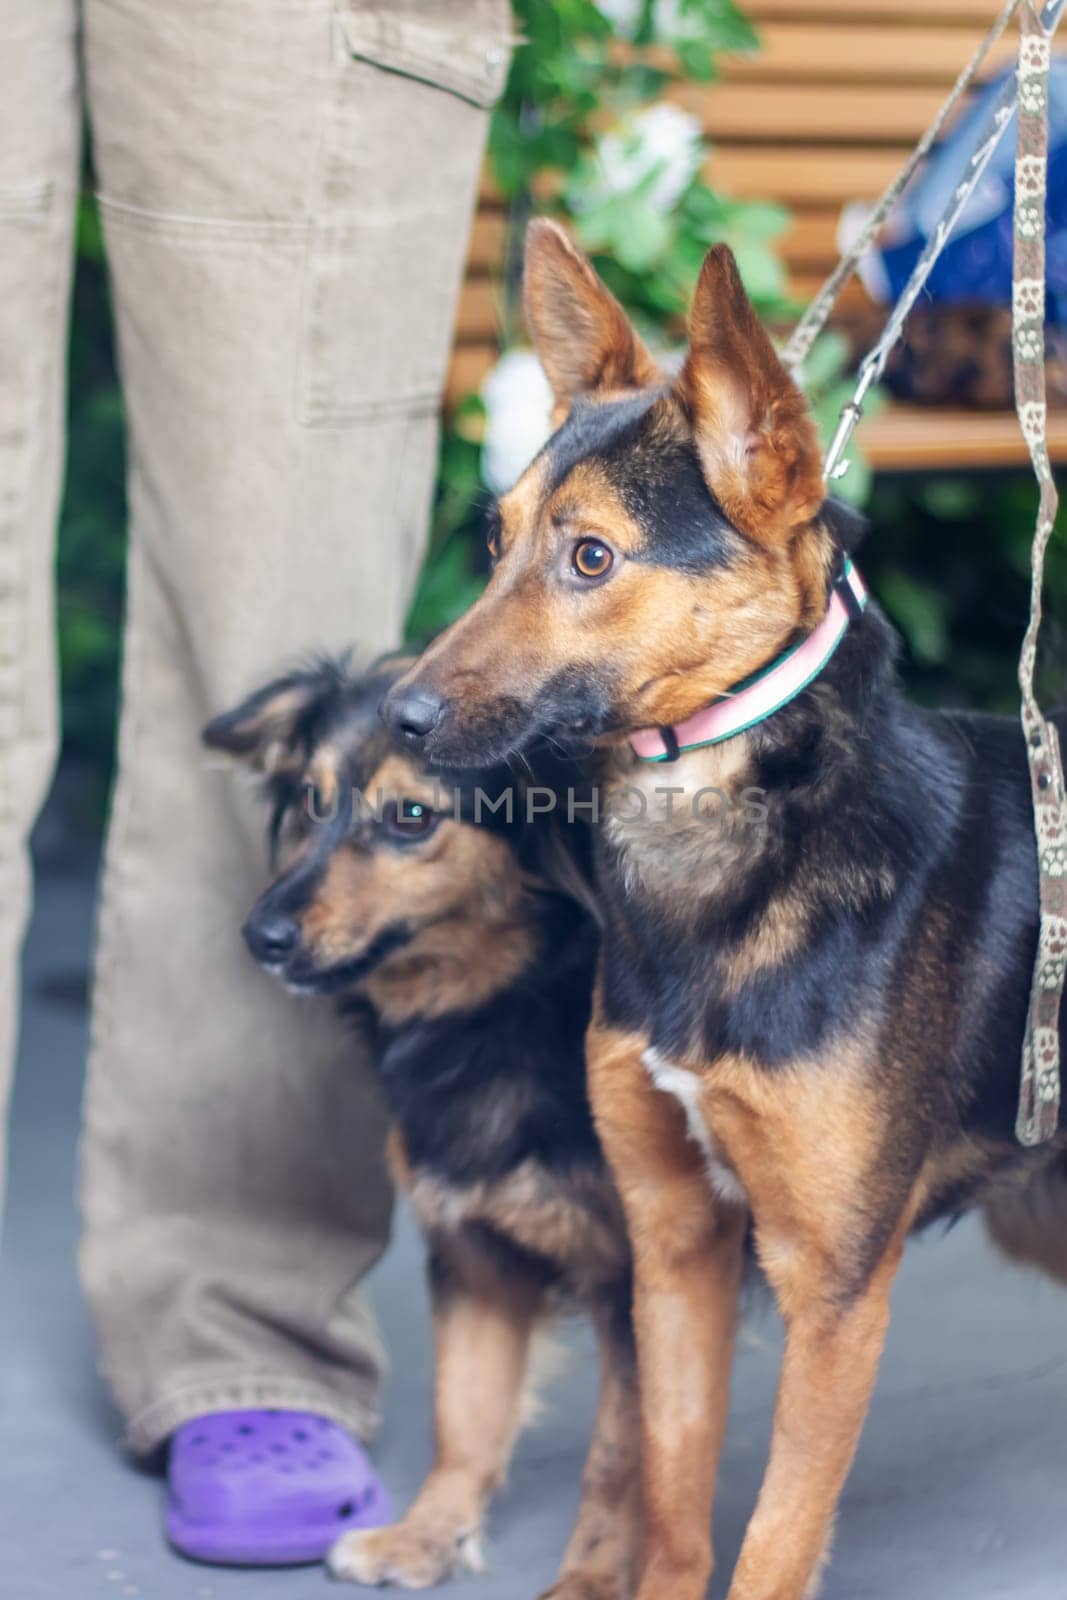 Two dogs are standing next to each other on a leash, representing different breeds and characteristics like herding and companion dogs, part of the Canidae family